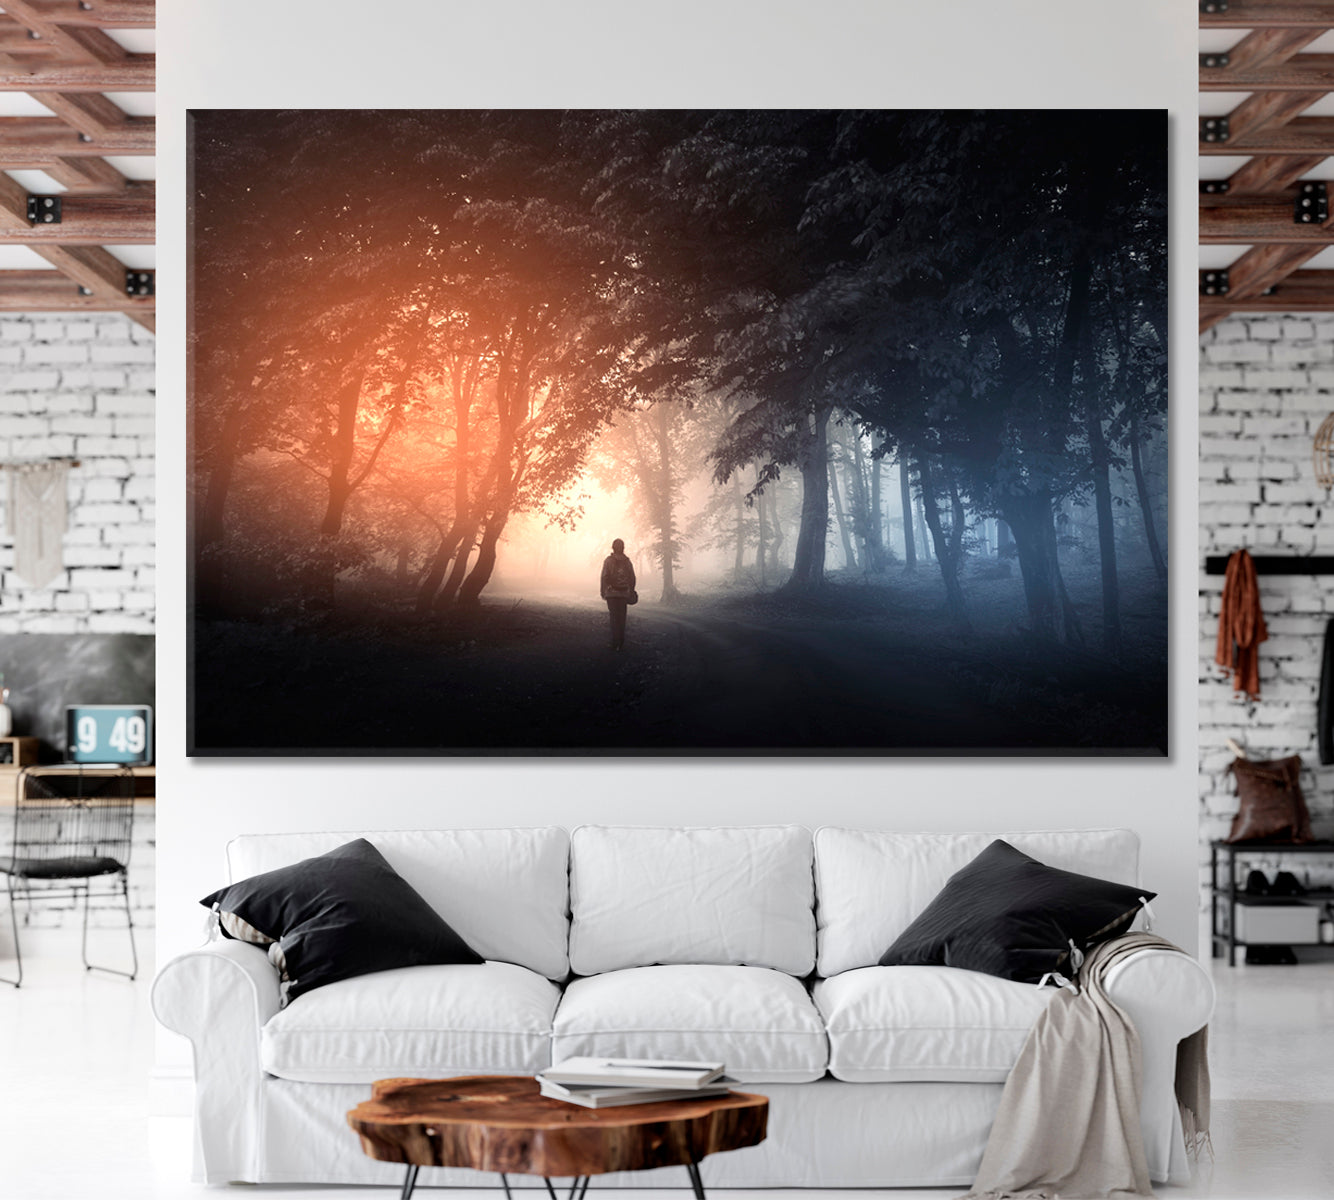 PATH TO THE LIGHT Mysterious Landscape Fantastic Surreal Misty Forest Trees Man Walking on the Path Scenery Landscape Fine Art Print Artesty 1 panel 24" x 16" 